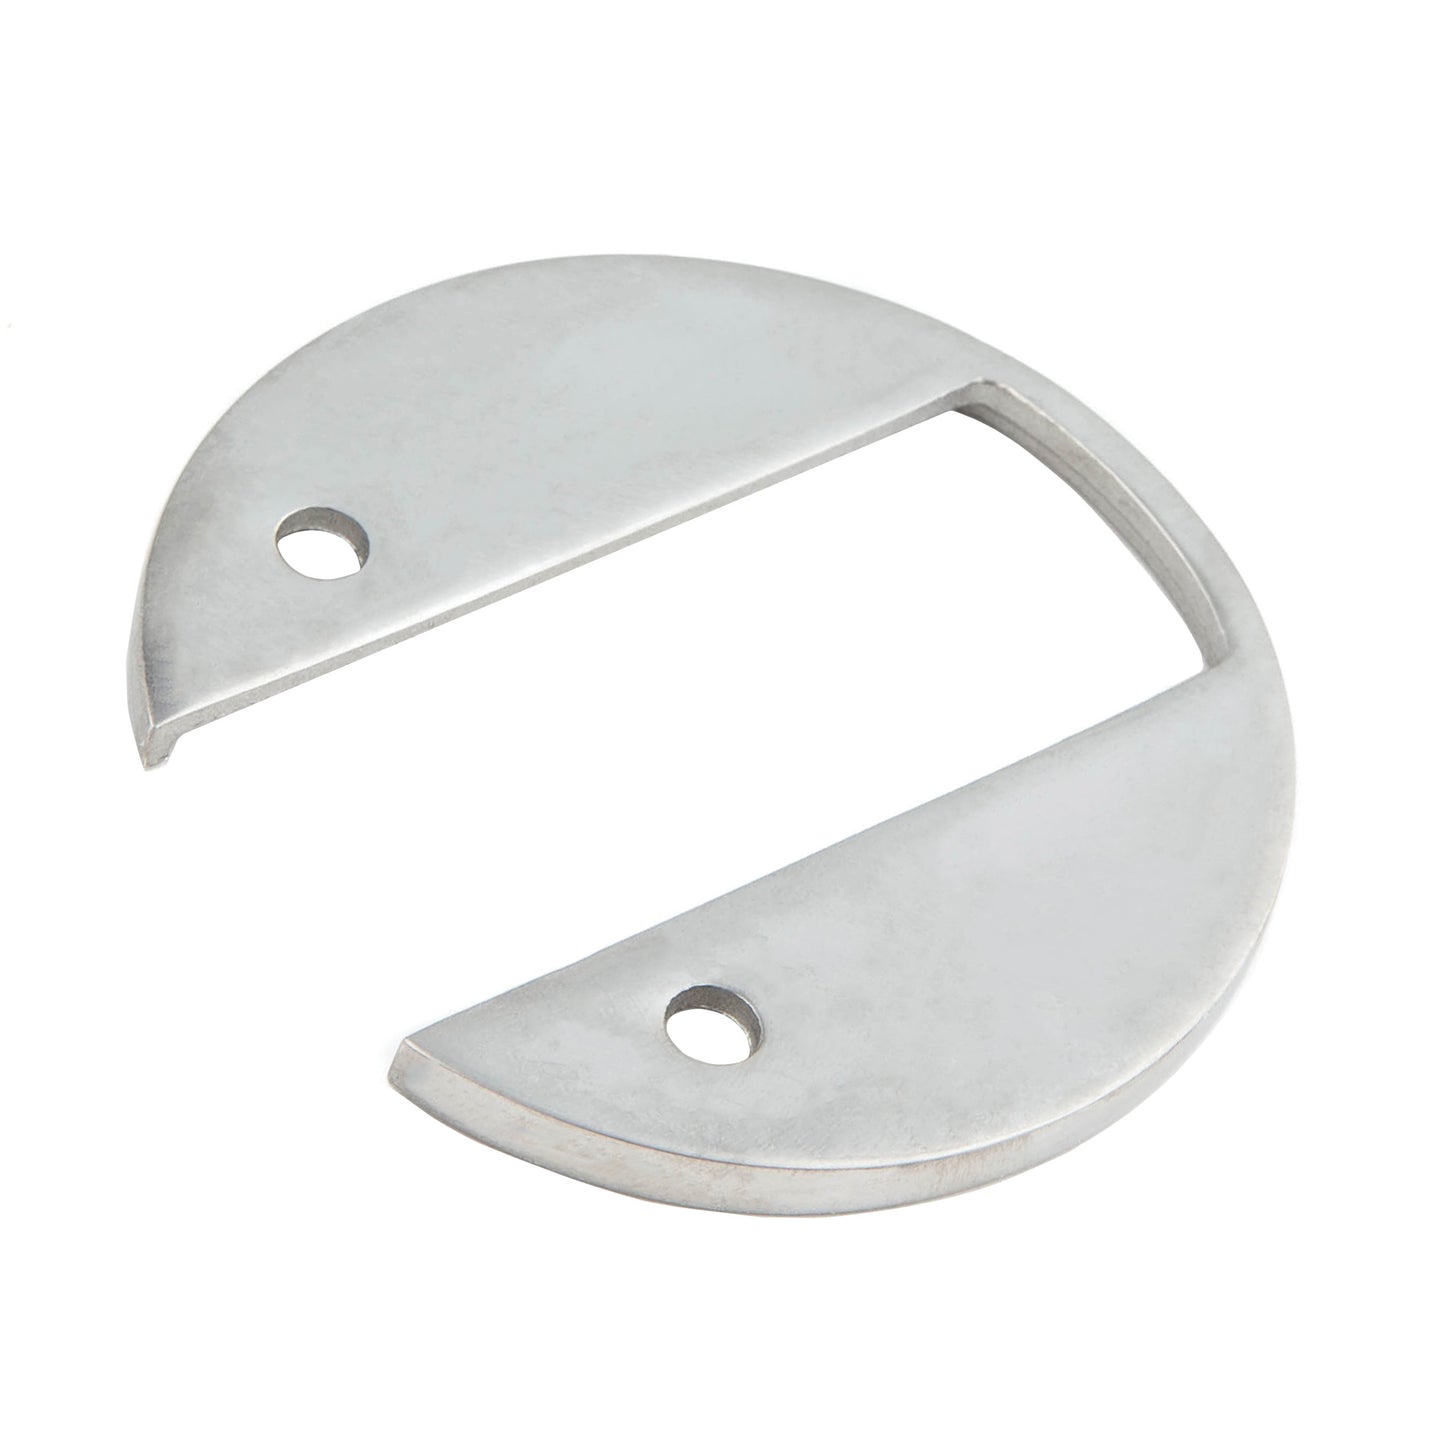 5mm D-Style Backing Plate for Slam Latch